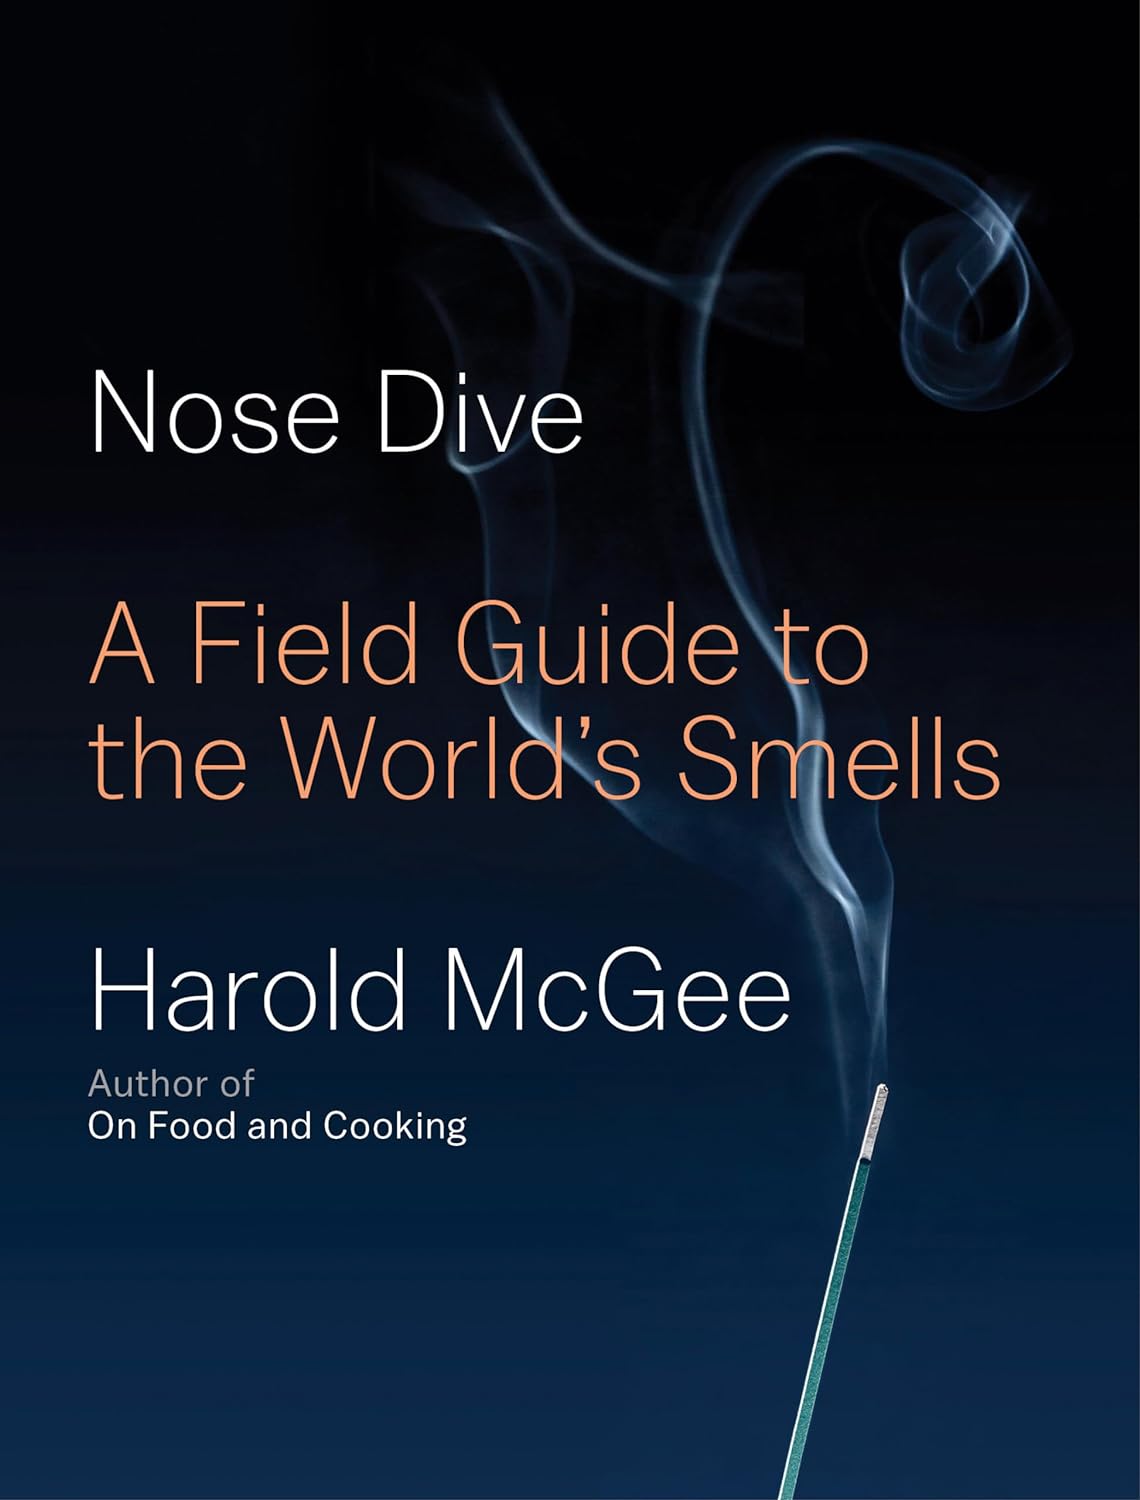 Nose Dive: A Field Guide to the World's Smells (Harold McGee) *Signed*